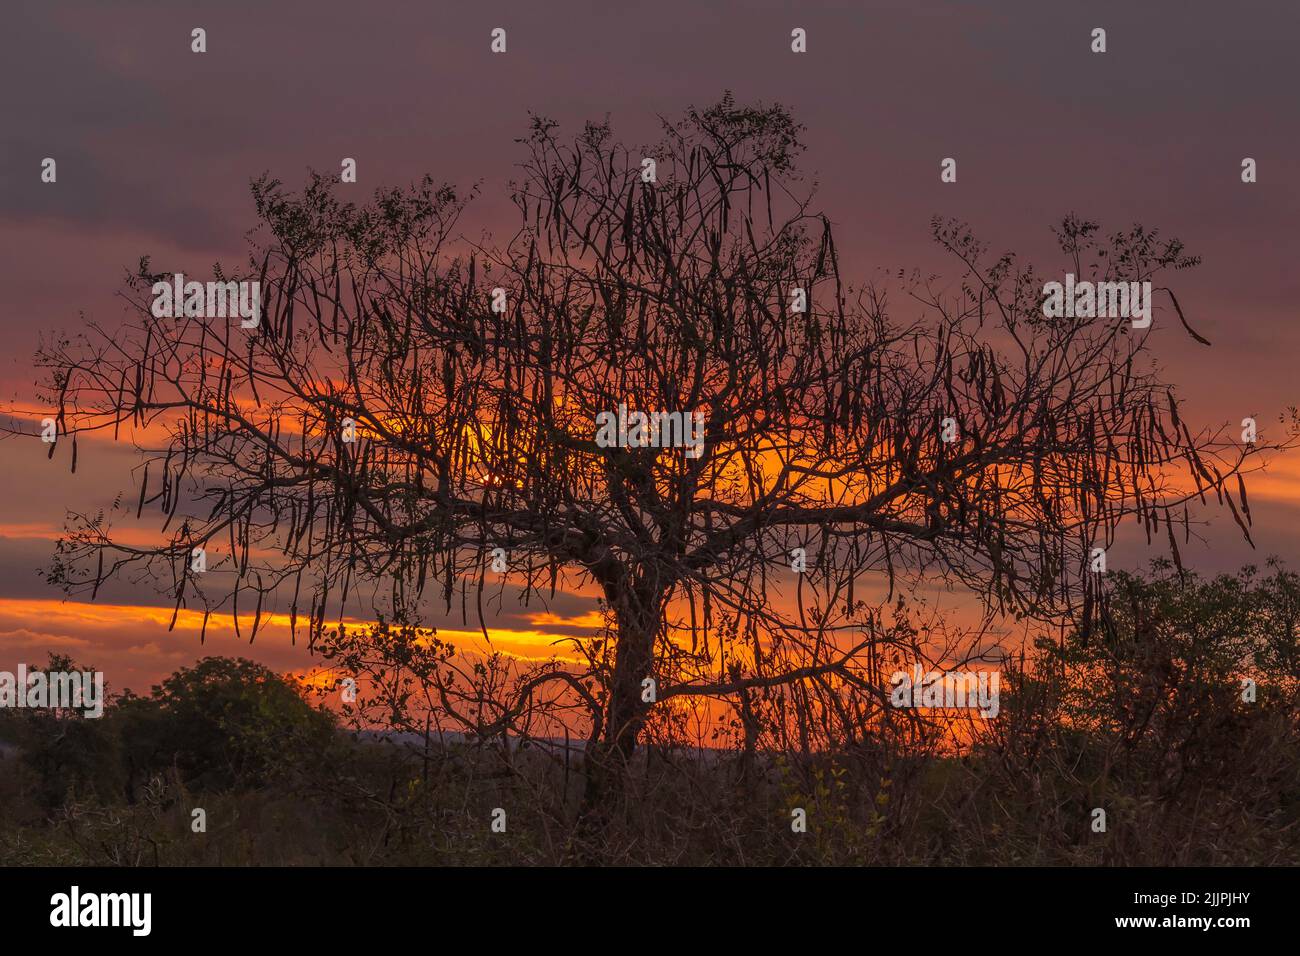 silhouette of an acacia tree at sunset Stock Photo